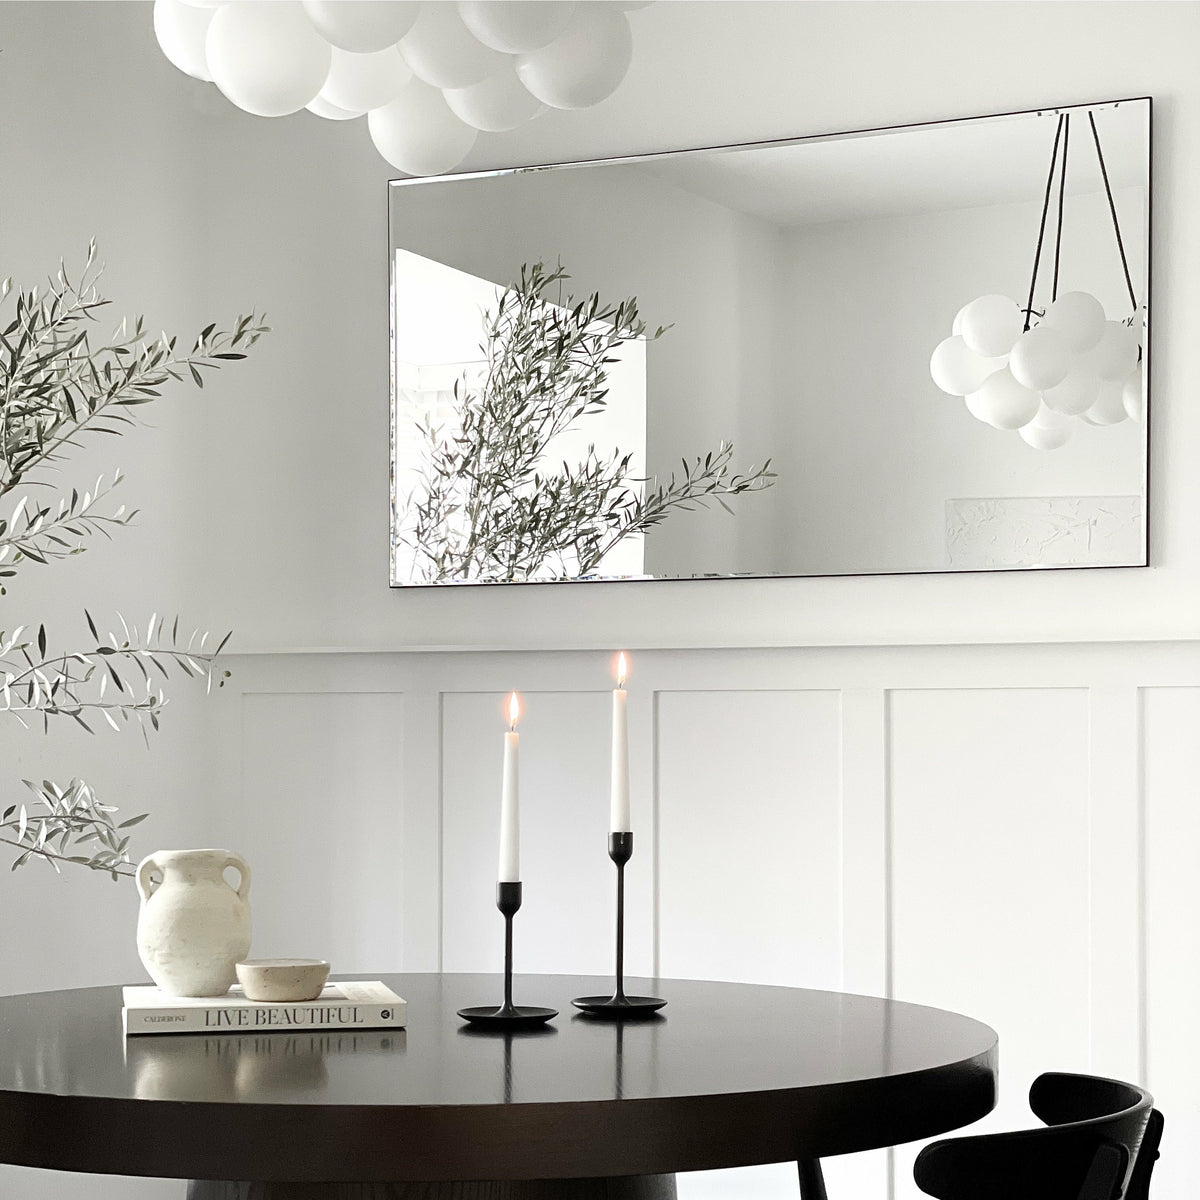 Large Frameless Rectangular Console Mirror displayed on wall above table